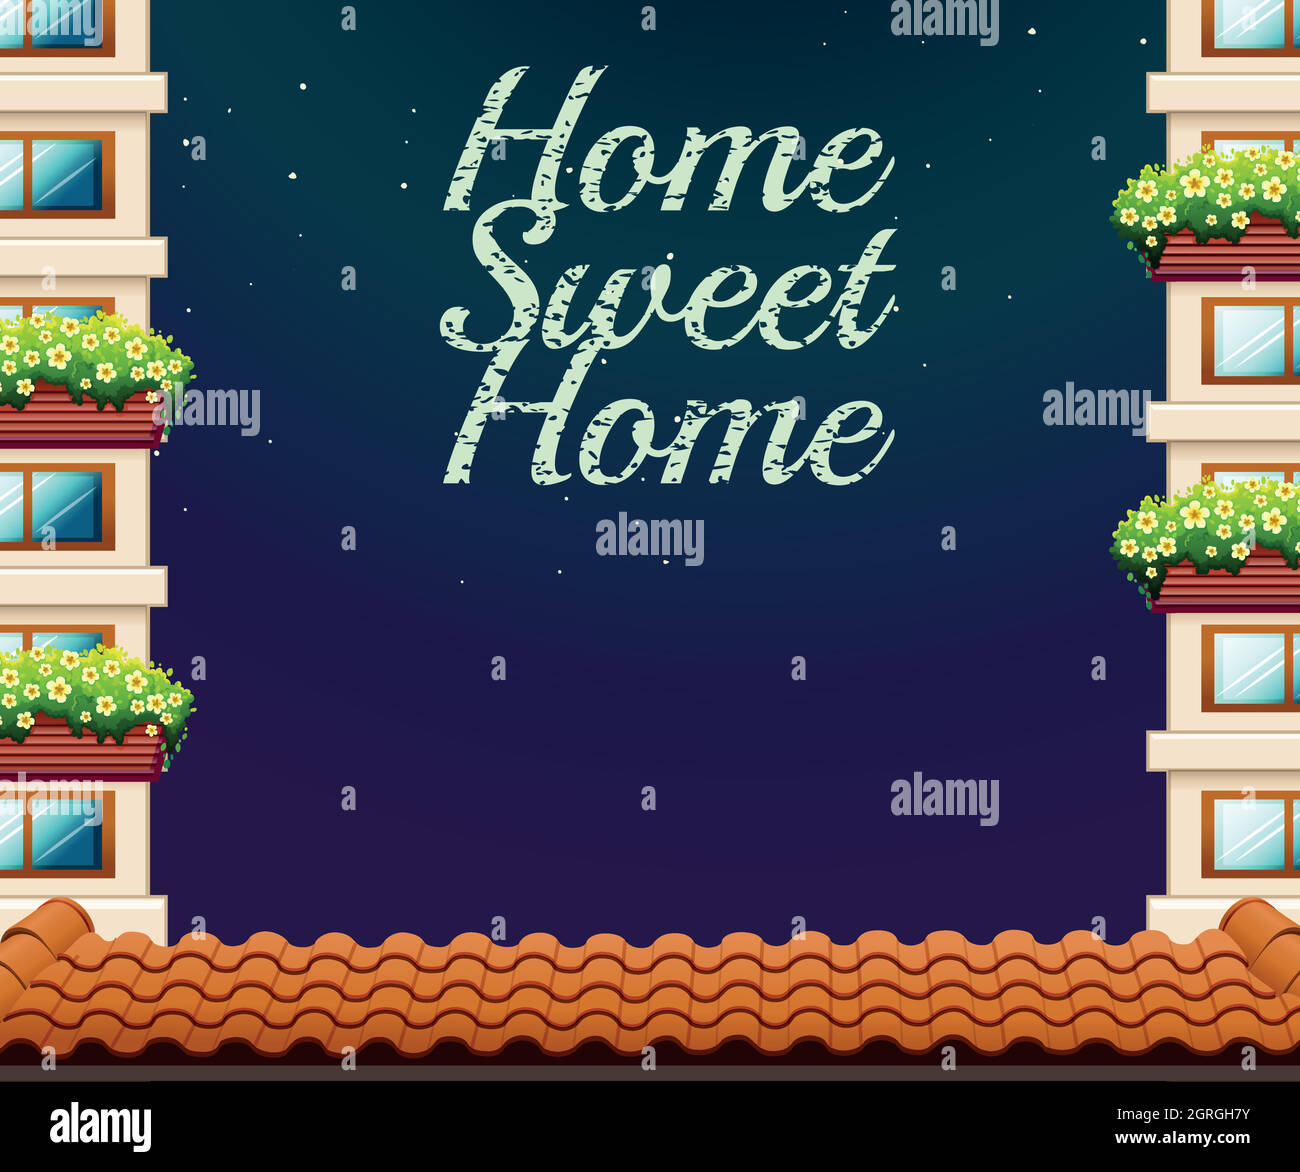 Home sweet home theme at night Stock Vector